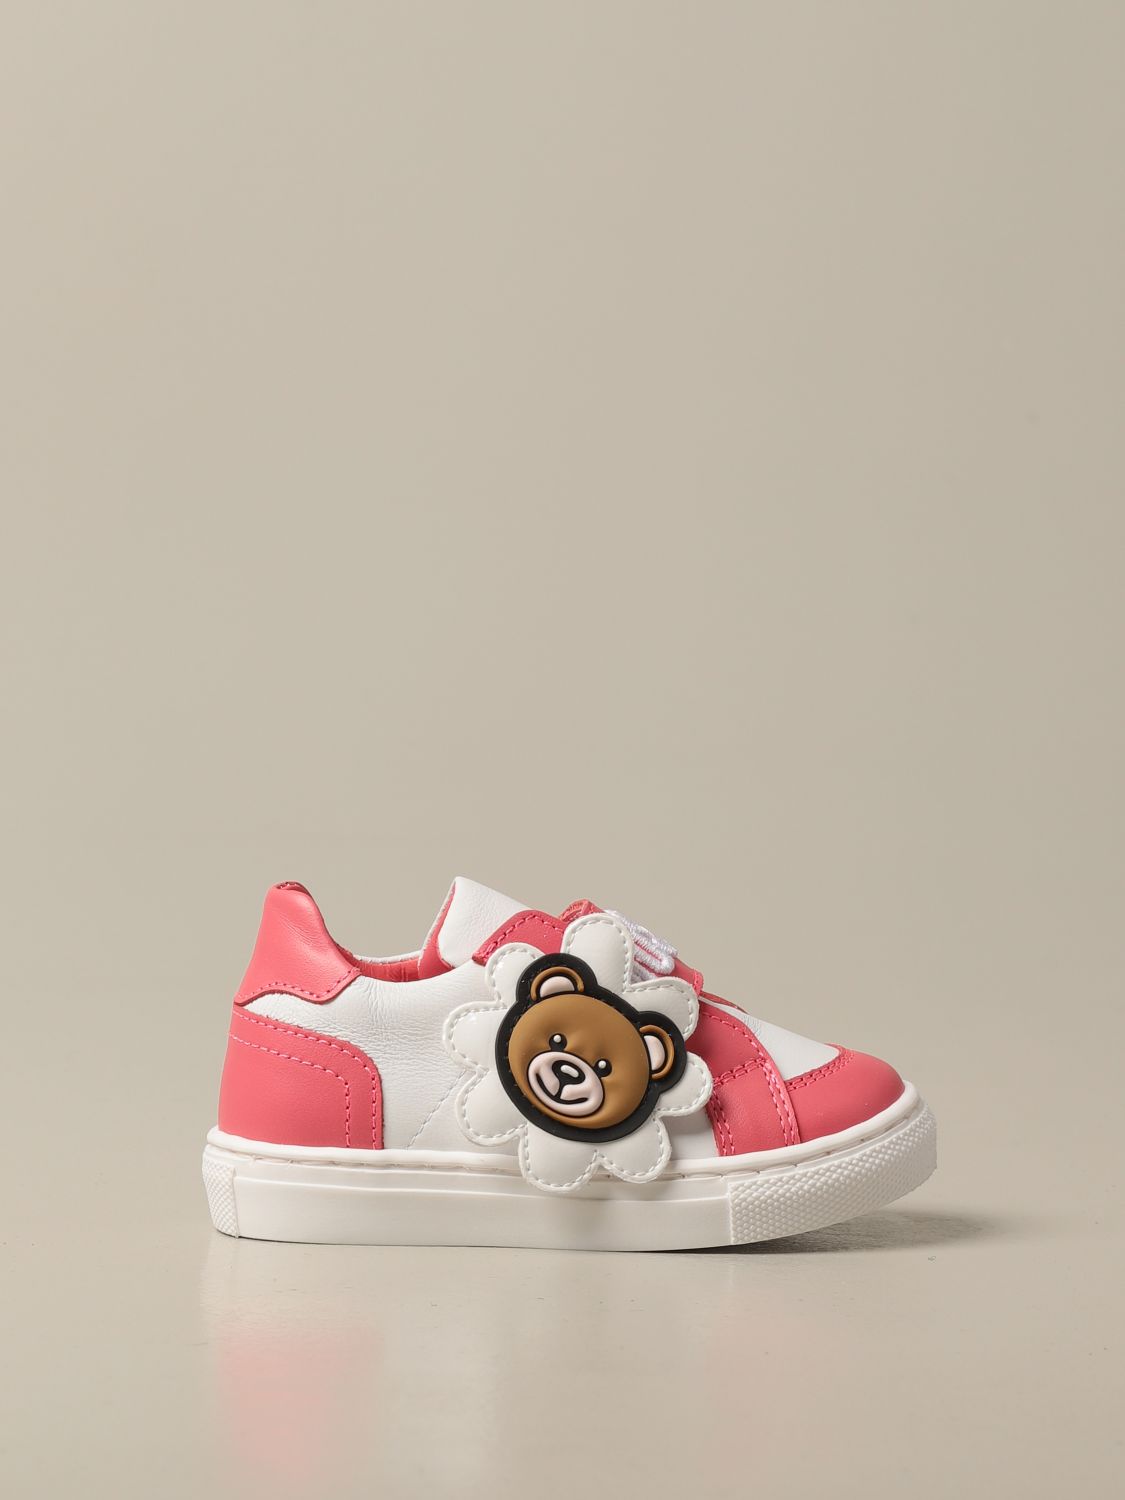 moschino baby shoes